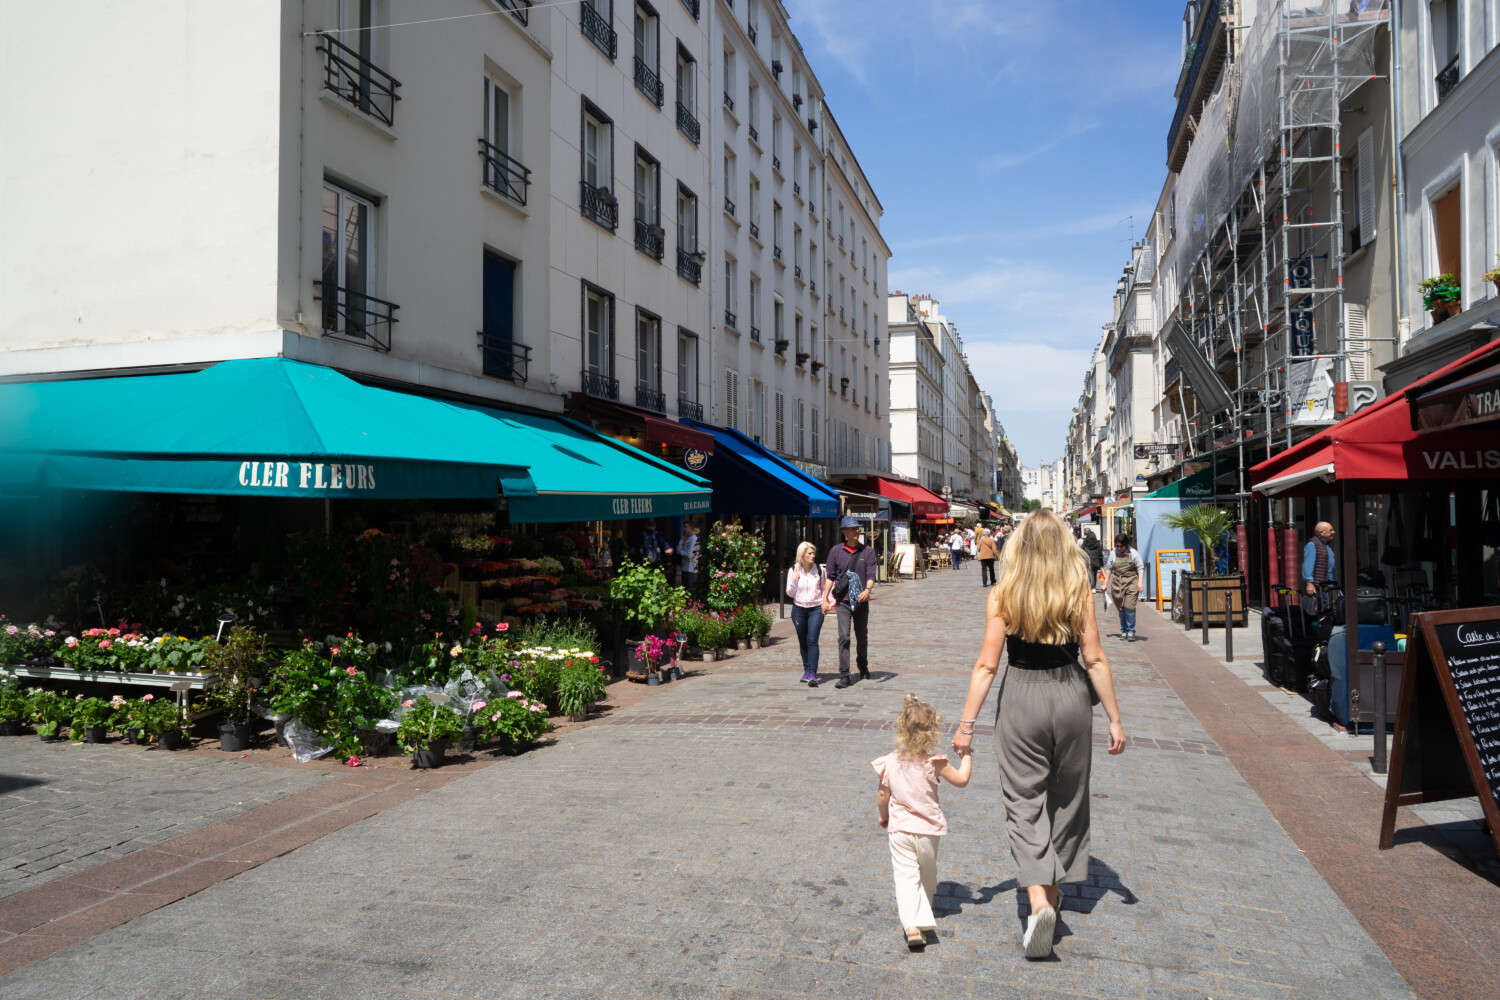 Ruth Nuss strolling with her kid and sharing Things to Do in Paris with Kids 